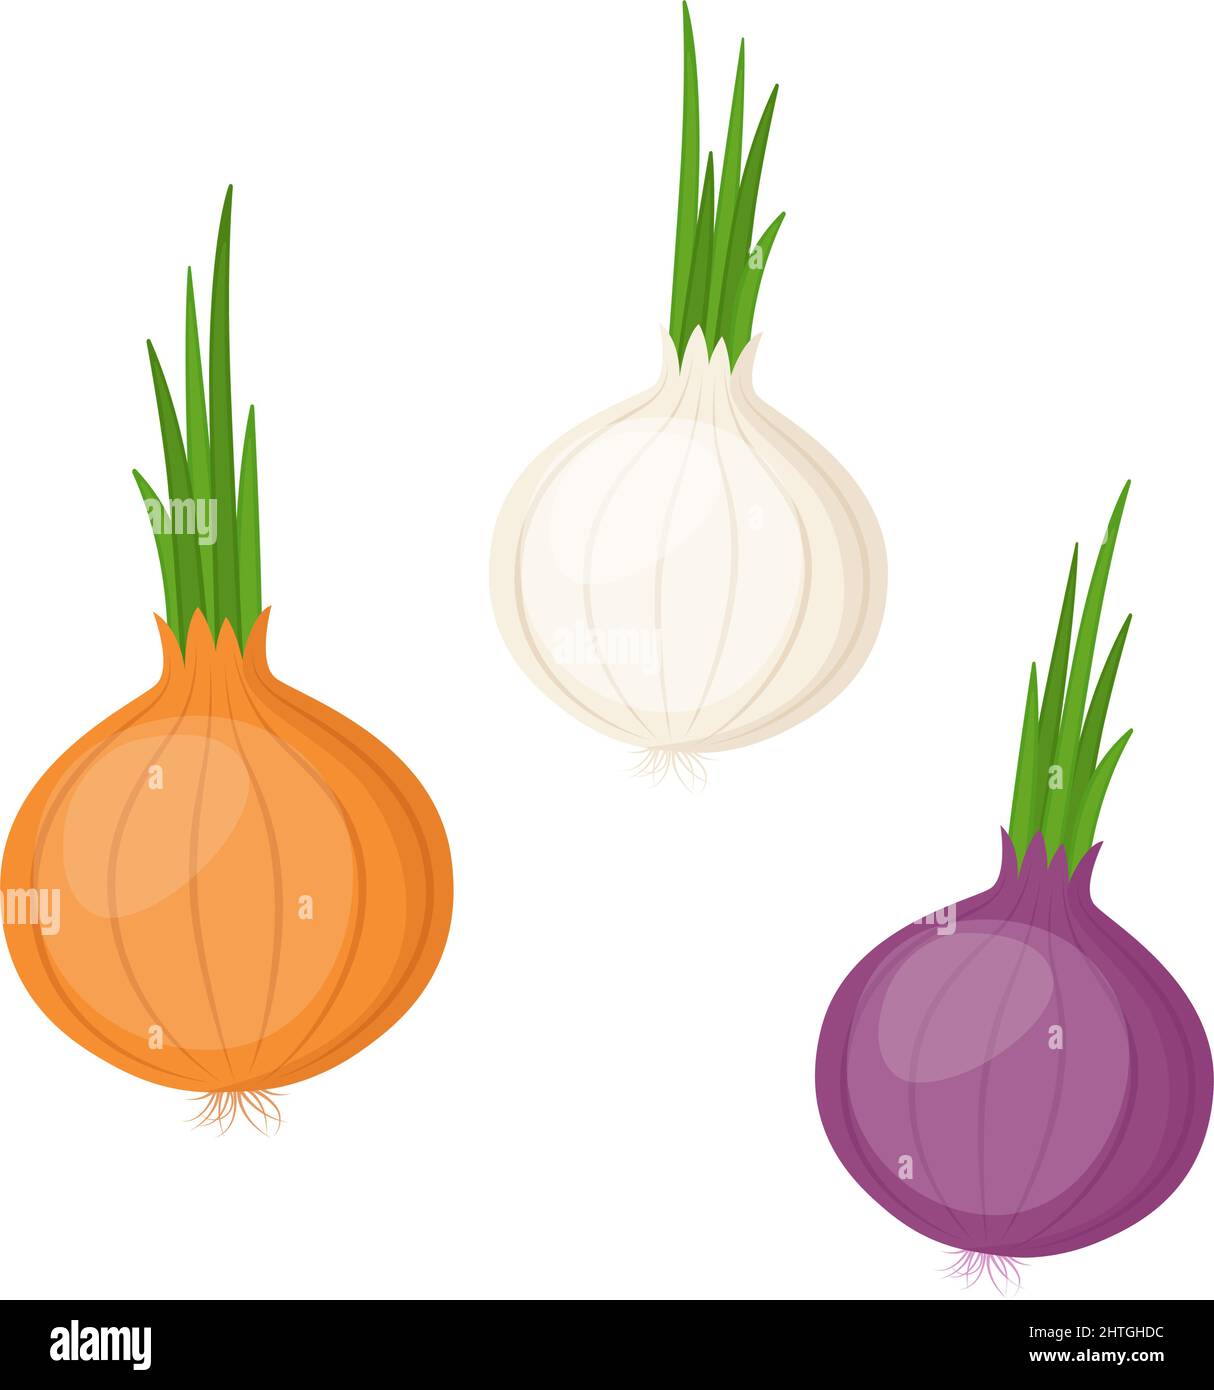 Yellow, white and red onion, vector illustration Stock Vector